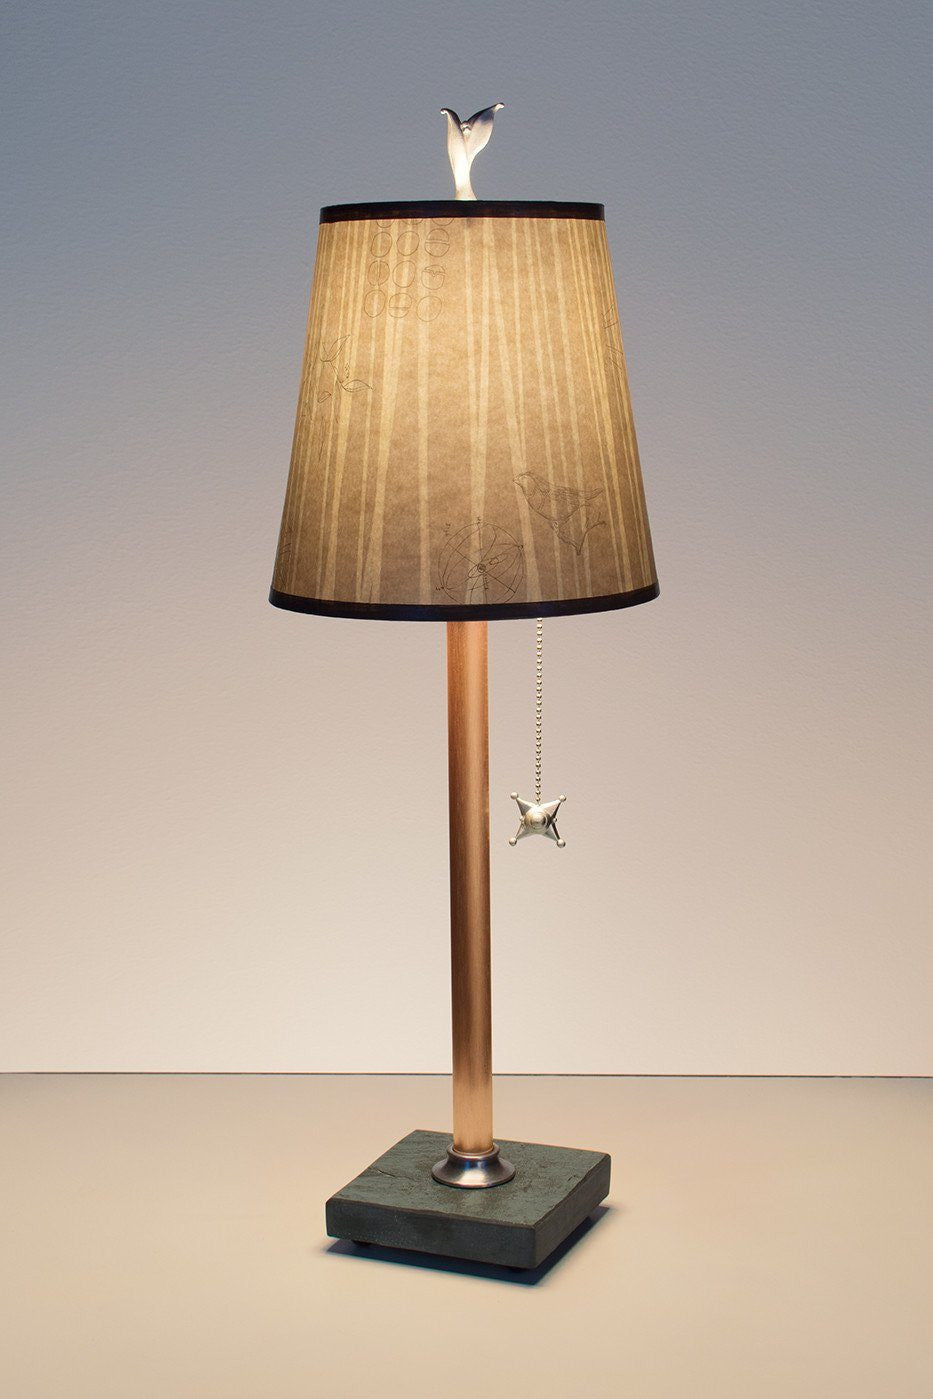 Copper Table Lamp on Vermont Slate Base with Small Drum Shade in Birch Lit